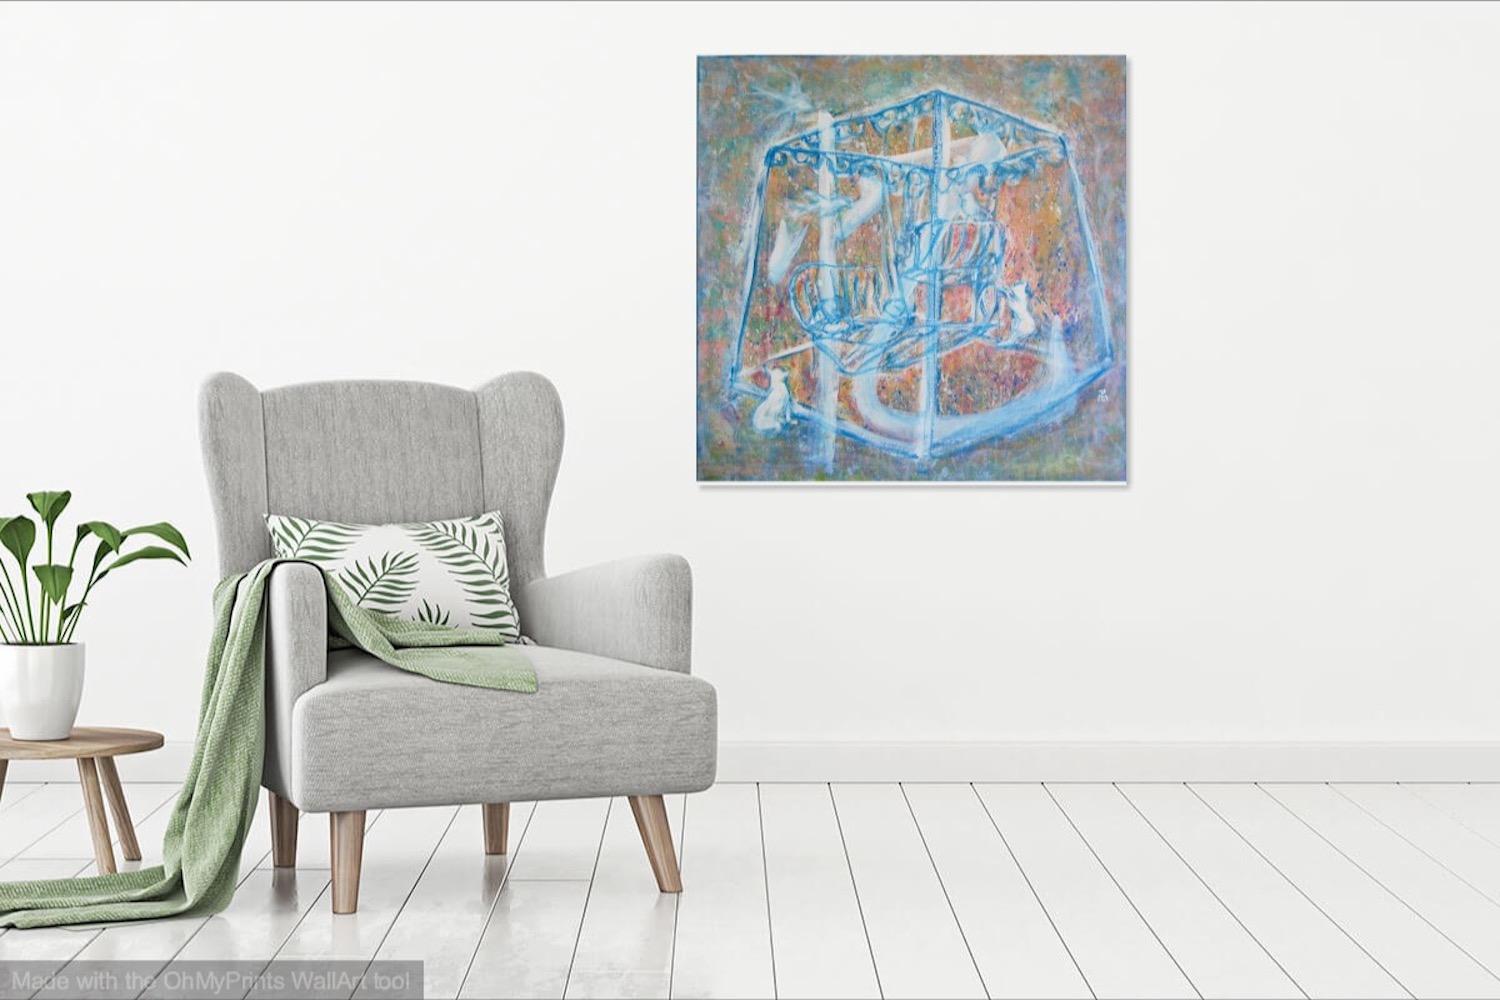 Yi Memory - abstract impressionist original acrylic painting fine art of whimsical heritage swing from artist's childhood dream in Singapore